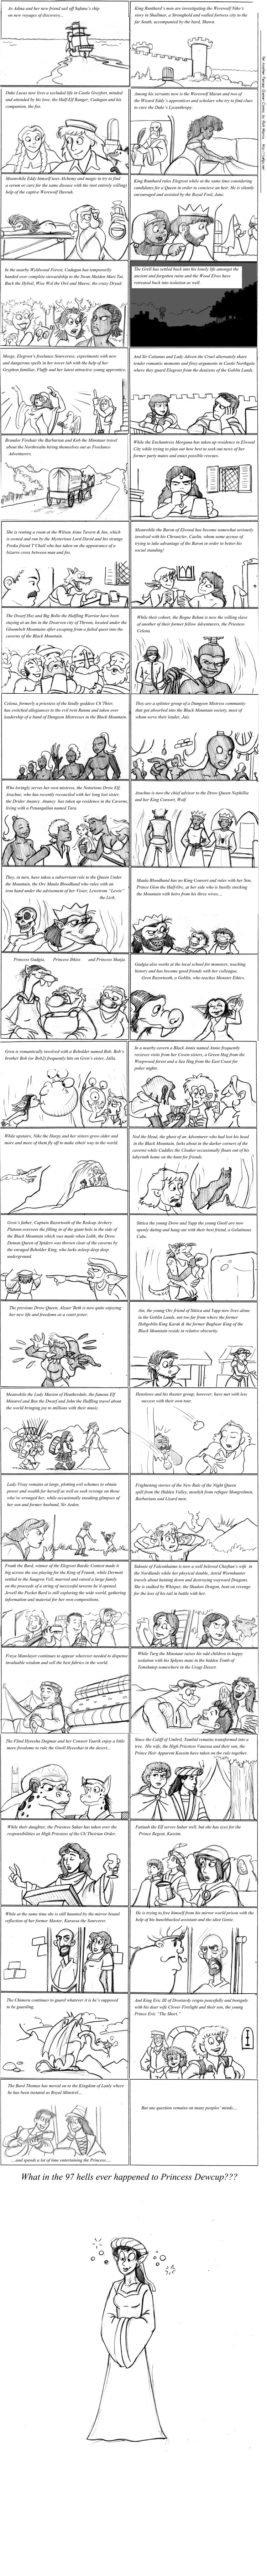 comic-2014-08-27-2670:-there-will-be-a-test-later.jpg